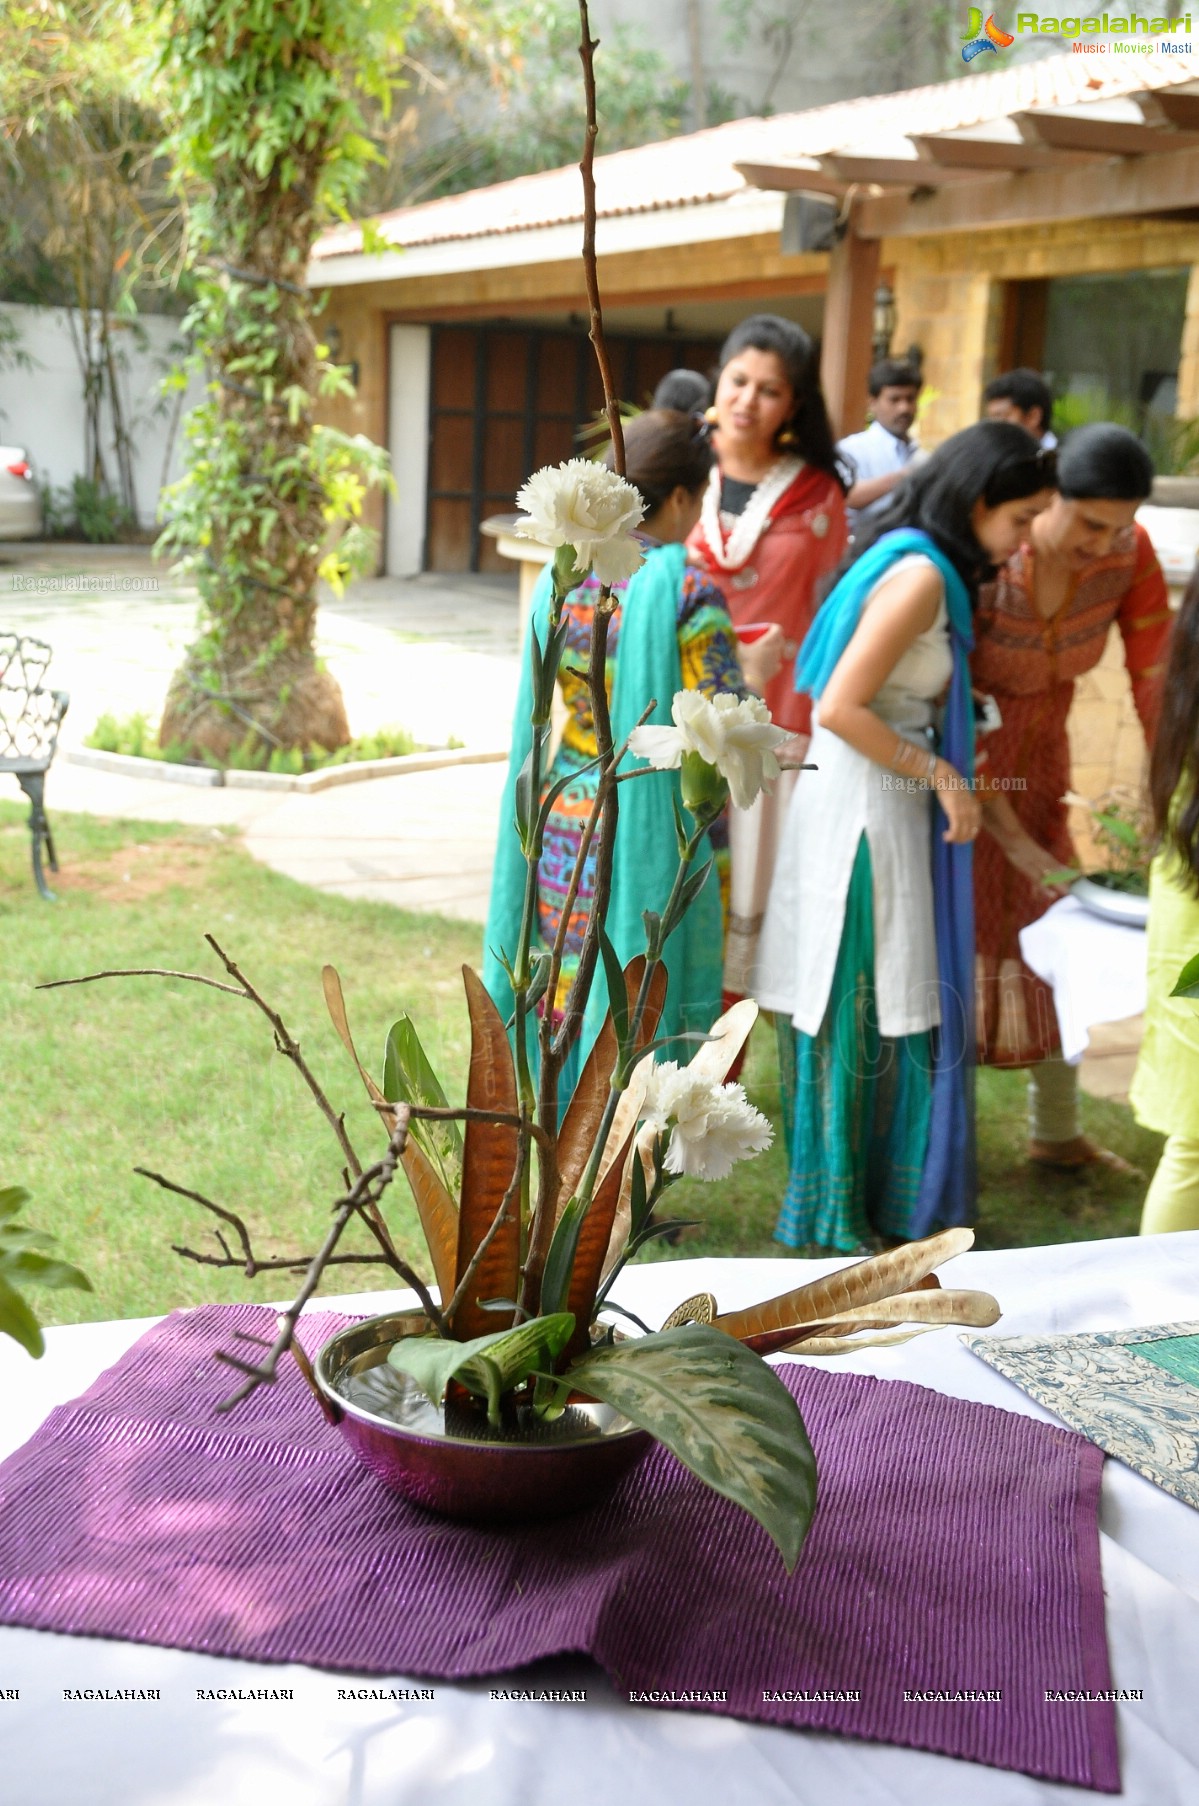 Mini lkebana Exhibition with Dry-Fresh Flowers and Foliage, Hyderabad